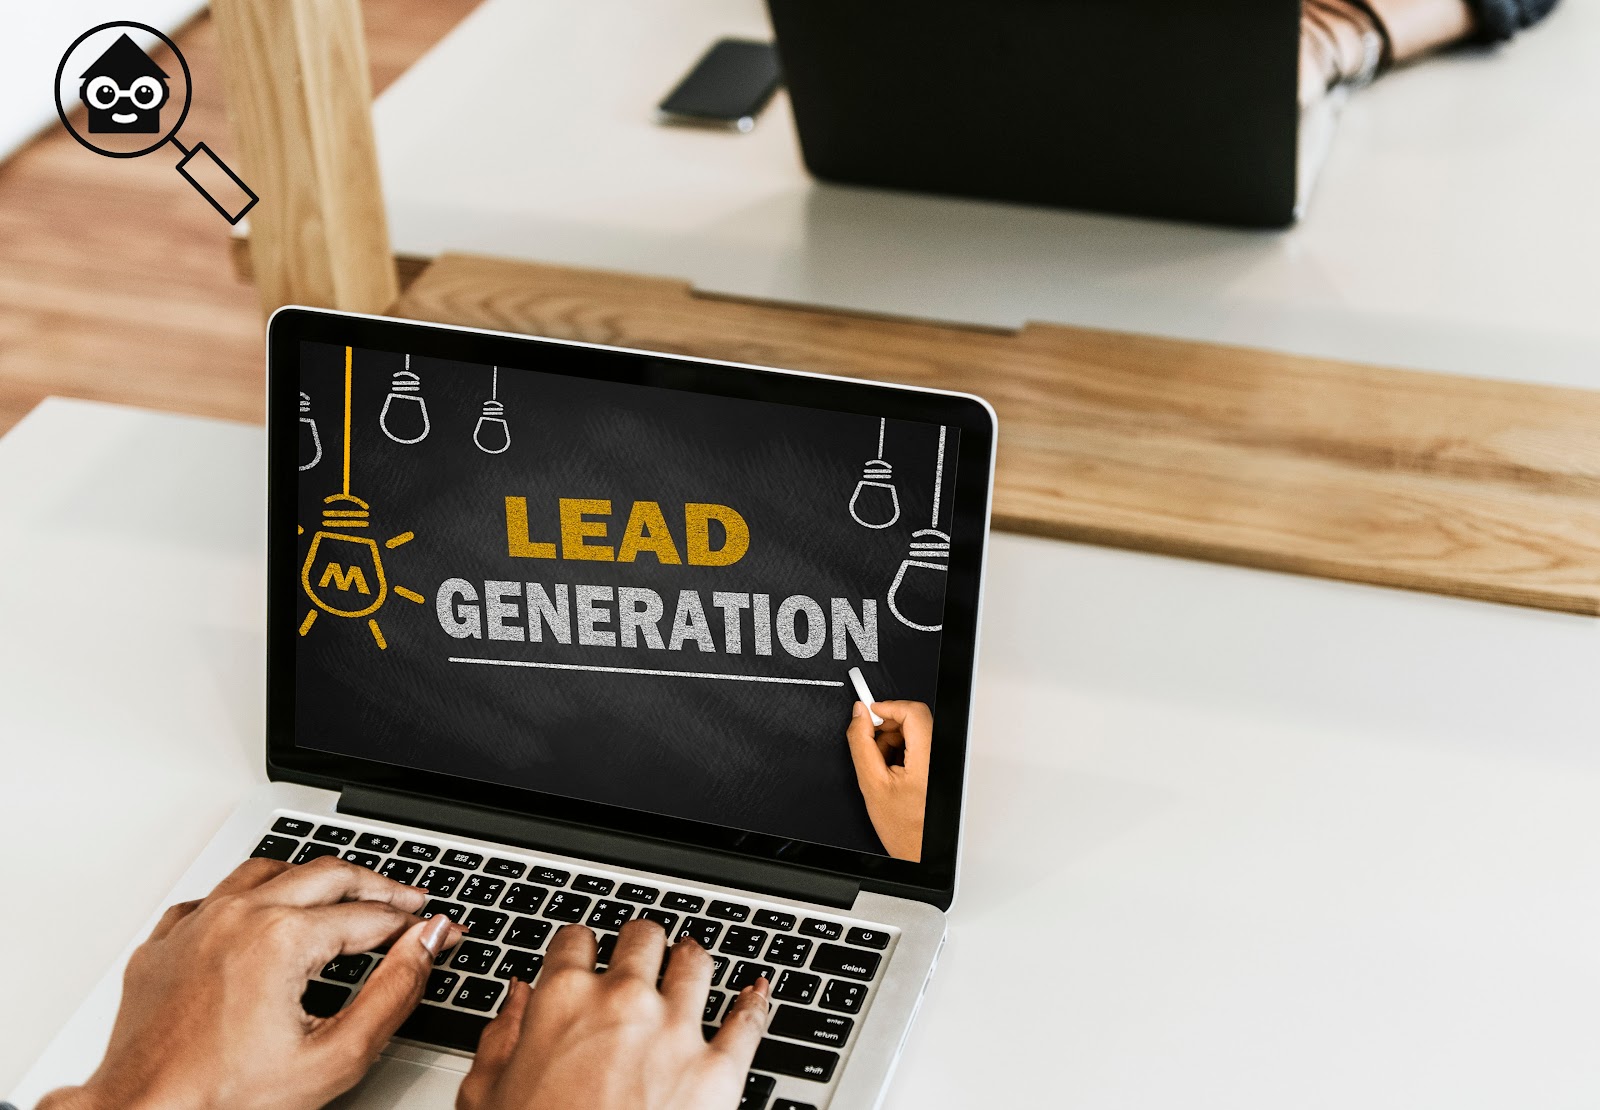 Lead generation - what is it?